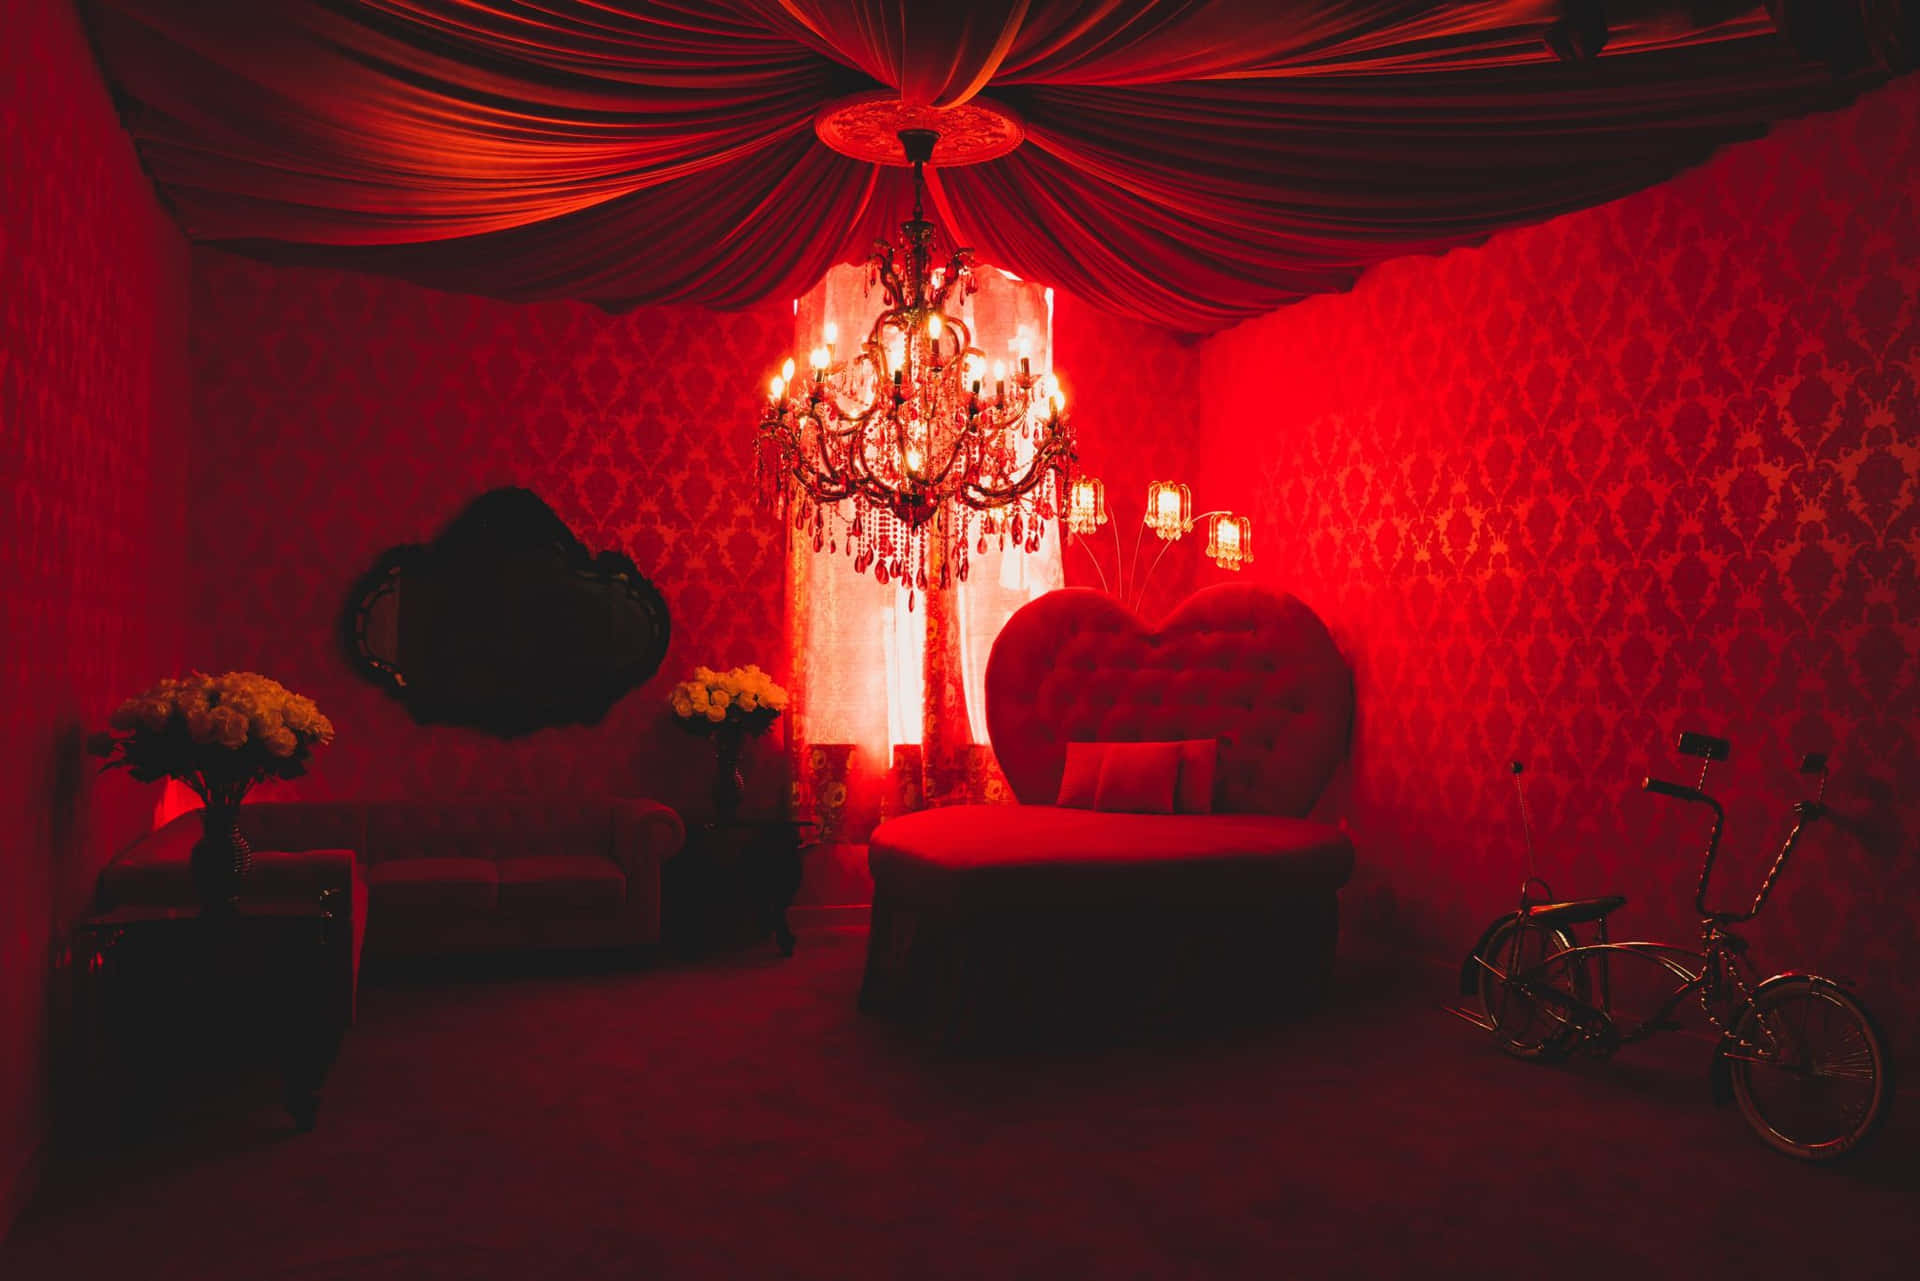 Get ready to be wowed by the beauty of the Red Room